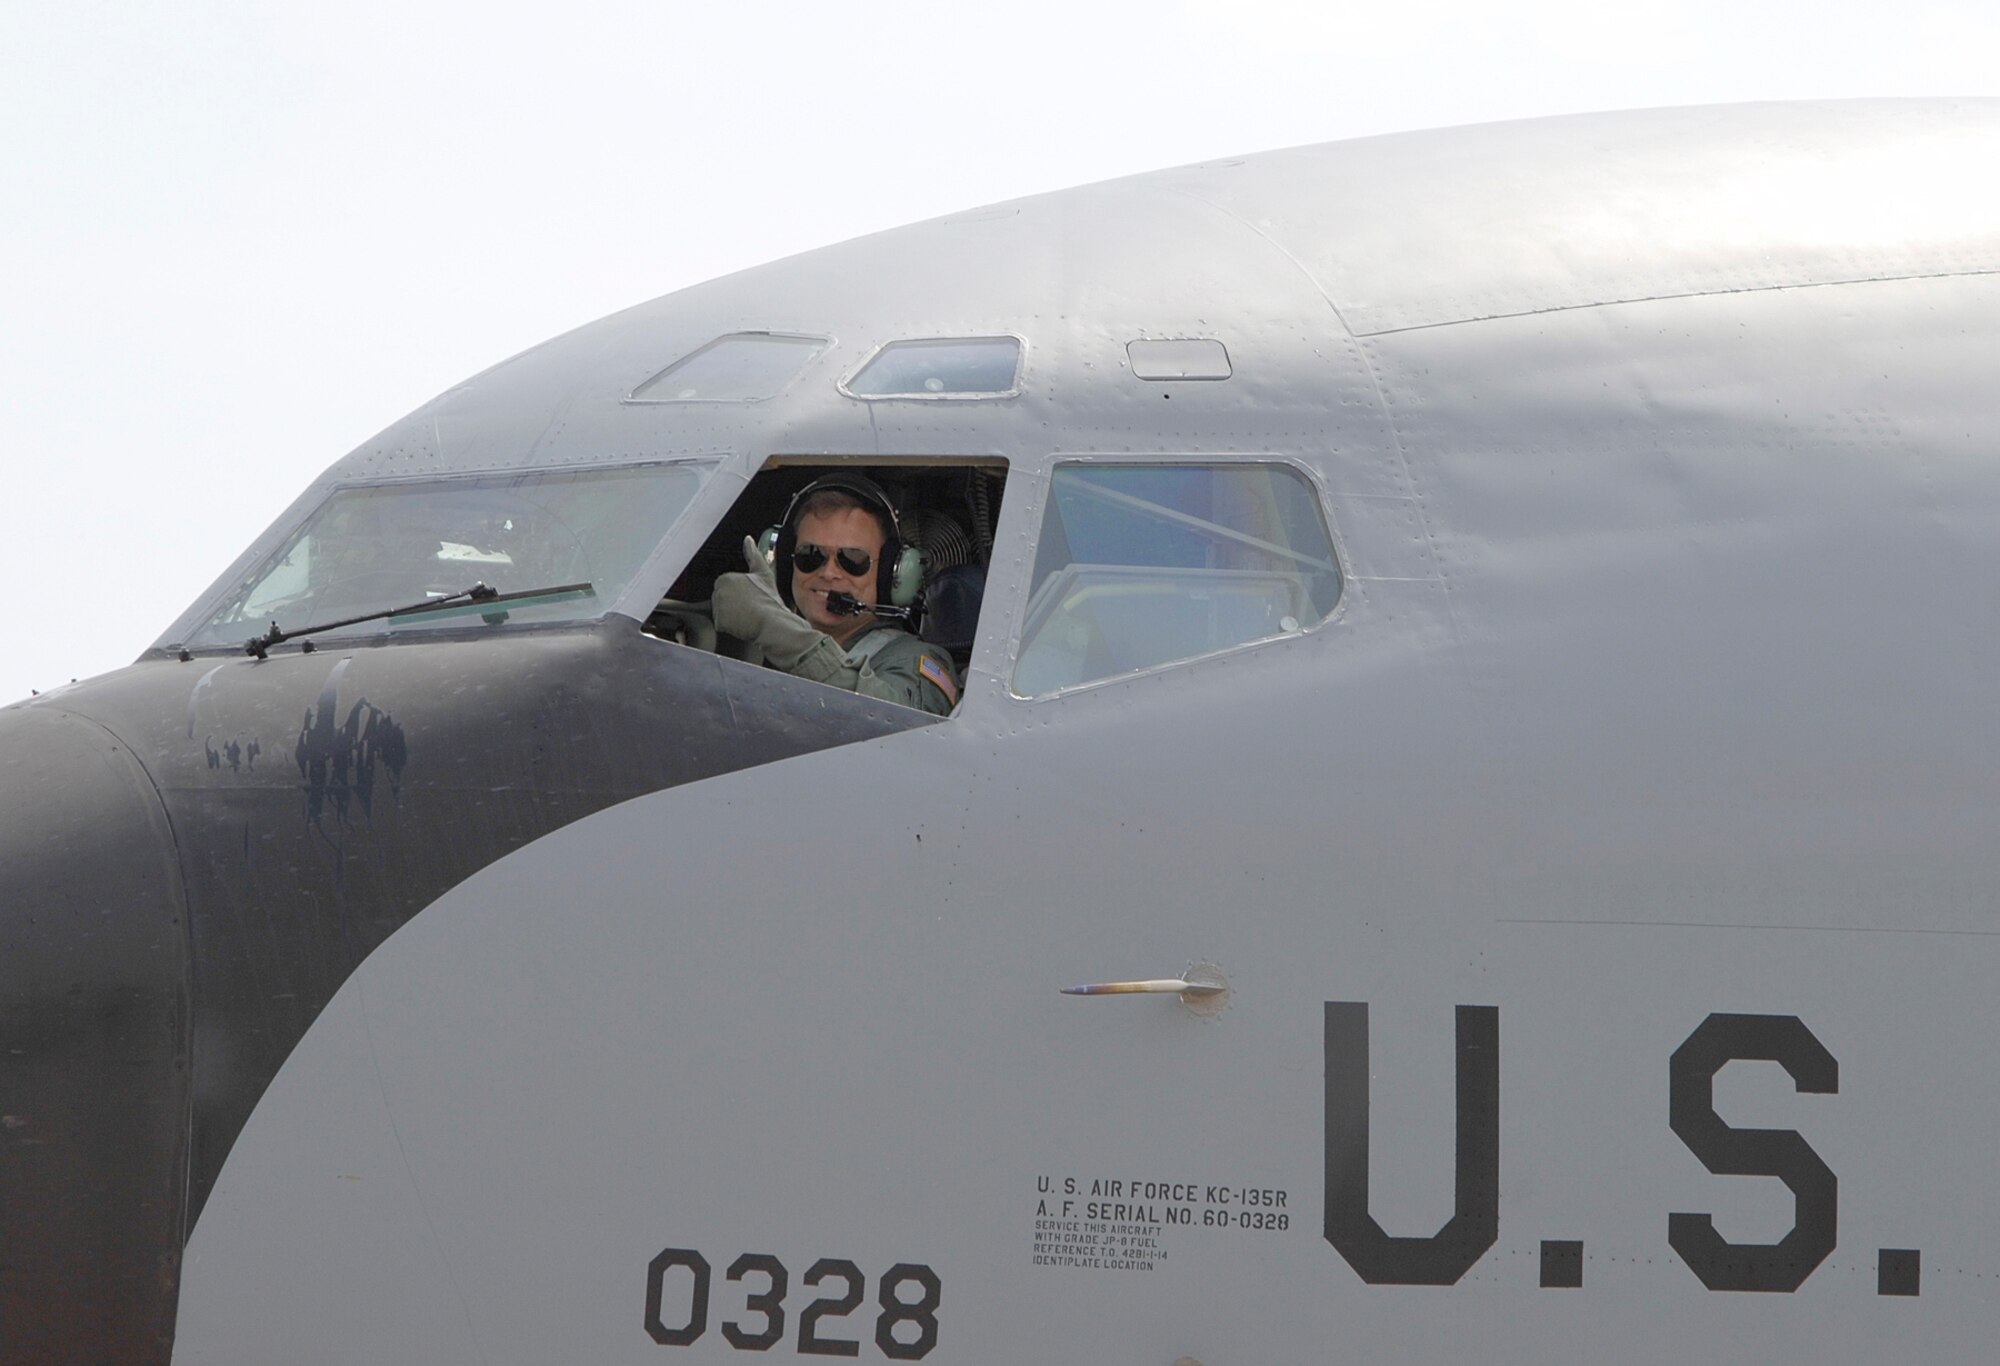 Col. T. Harrison Smith, Jr., 22nd Air Refueling Wing vice commander, gives a “thumbs-up” as he takes his final flight at McConnell flying a KC-135 Stratotanker. During his 23 years of service, he spent more than one year at McConnell and will serve his next assignment as commander of the 376th Air Expeditionary Wing, Manas Air Force Base, Kyrgyzstan. (Photo by Airman 1st Class Jamie Train)